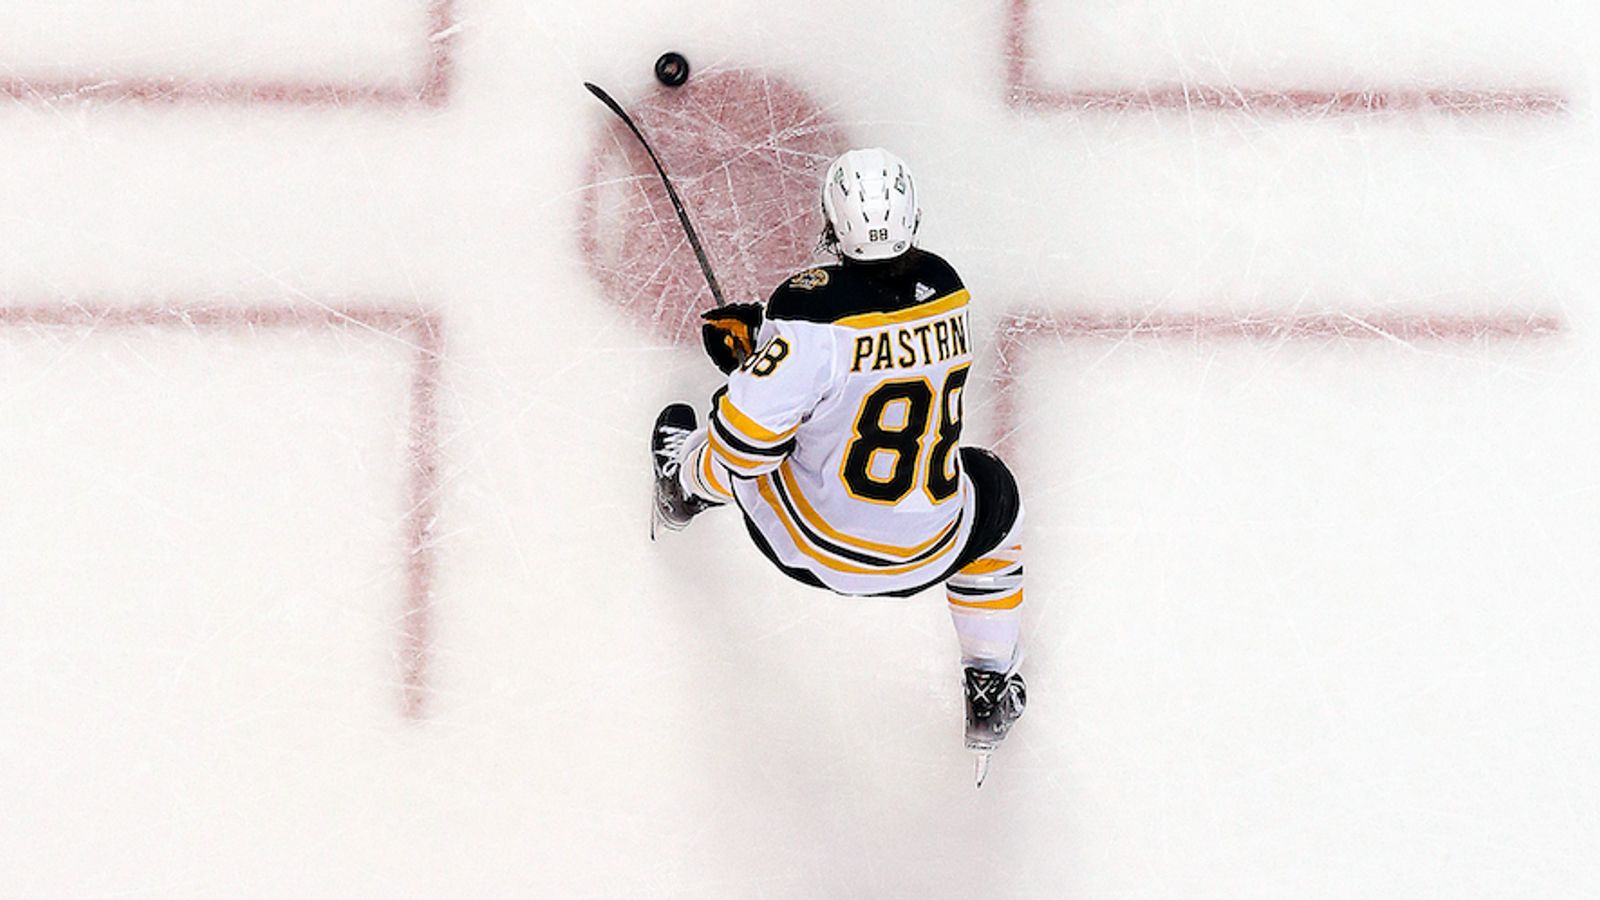 The Bruins are back, in case you haven't noticed